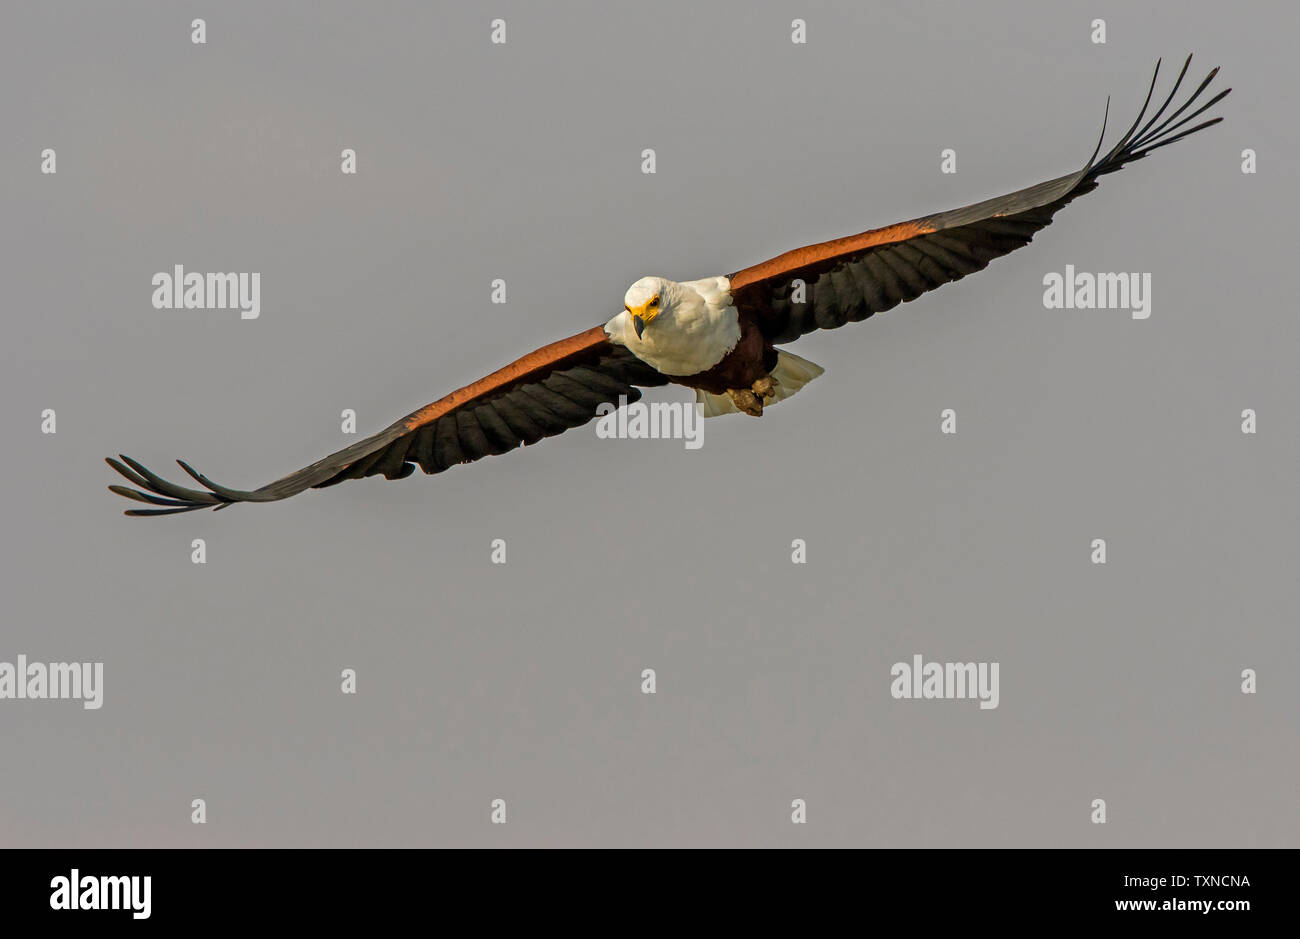 African fish eagle flying mid air, front view, Kruger National Park, South Africa Stock Photo